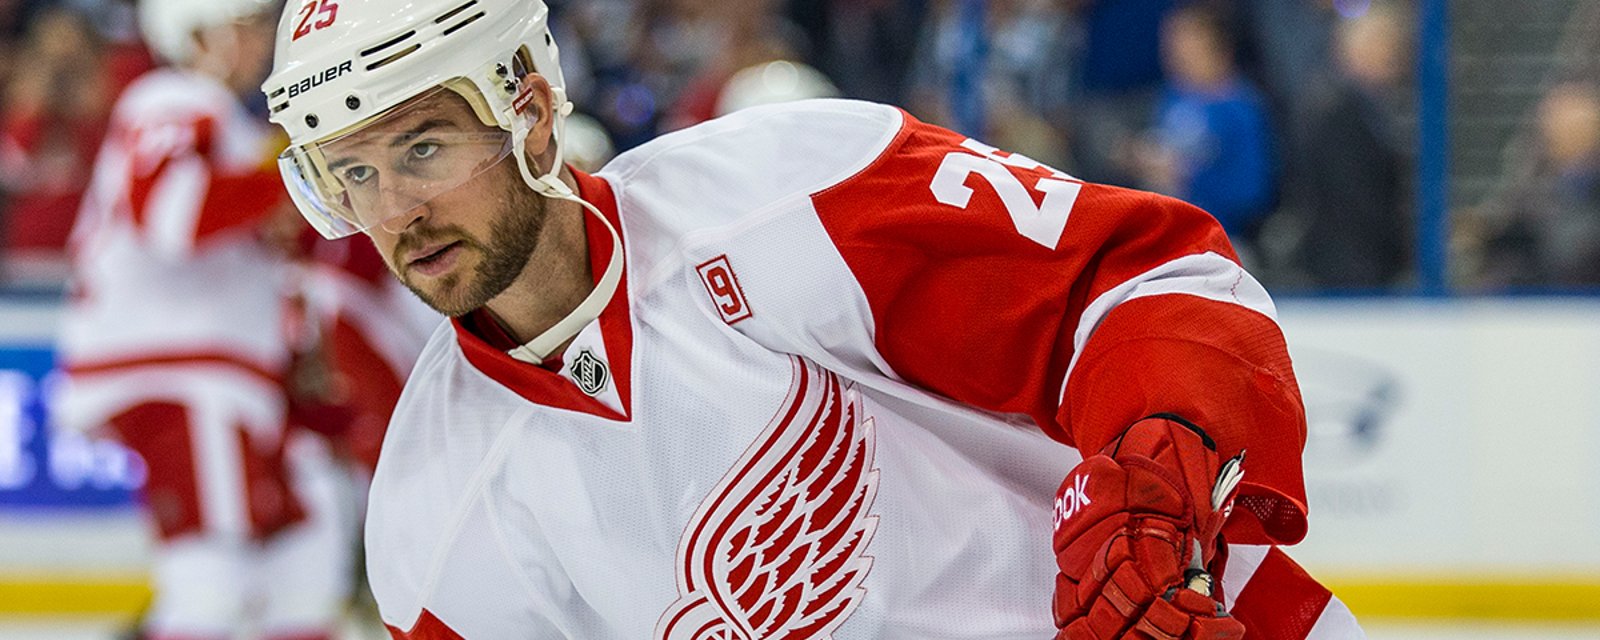 Your Call: Should the Leafs trade for Mike Green?